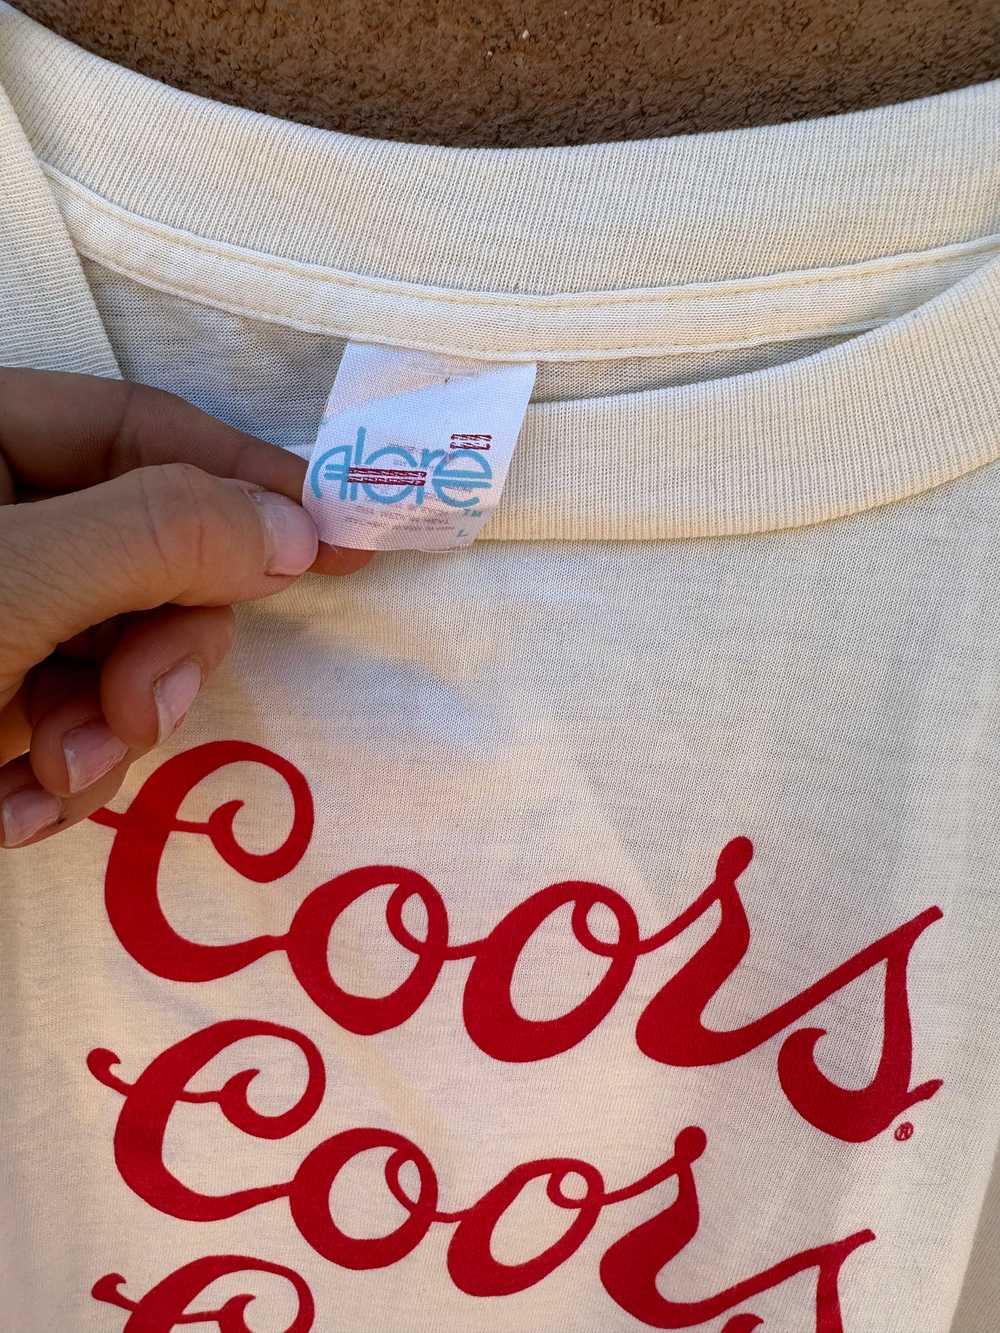 1970's Coors Cream Colored T-shirt - image 2